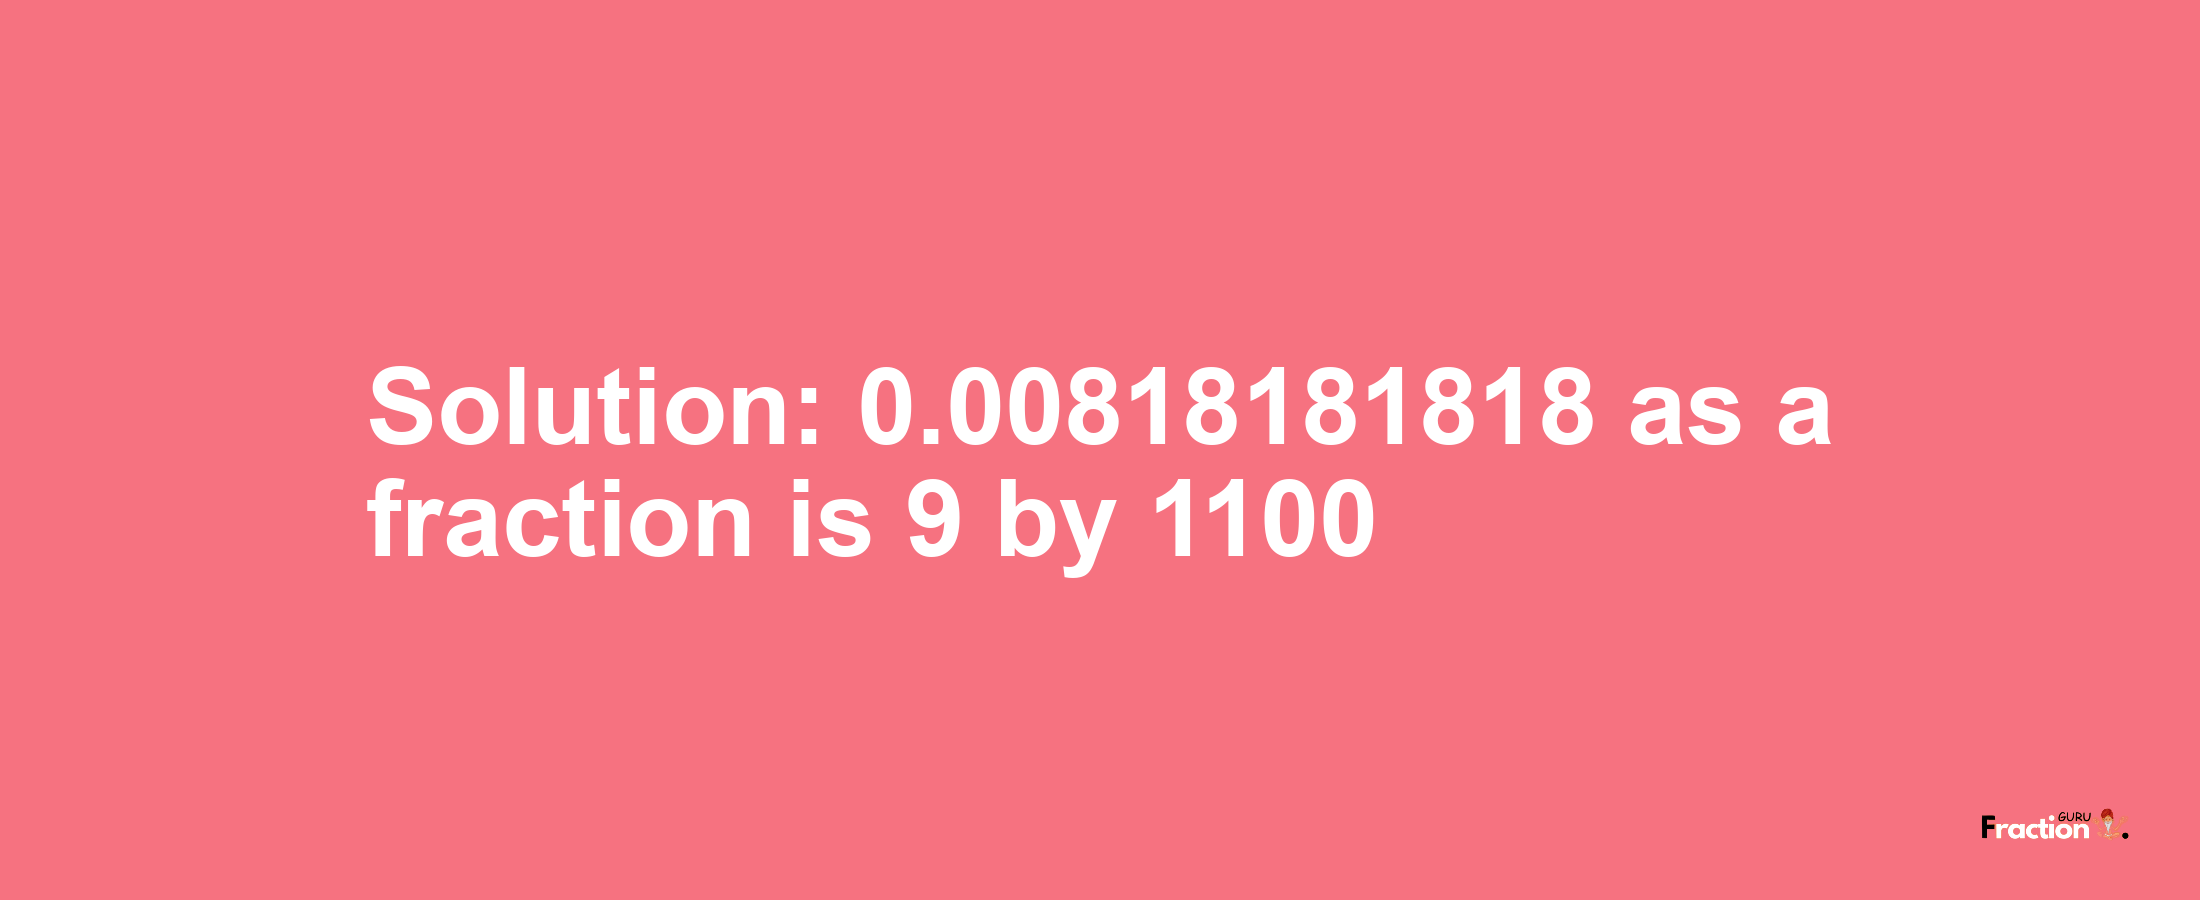 Solution:0.00818181818 as a fraction is 9/1100